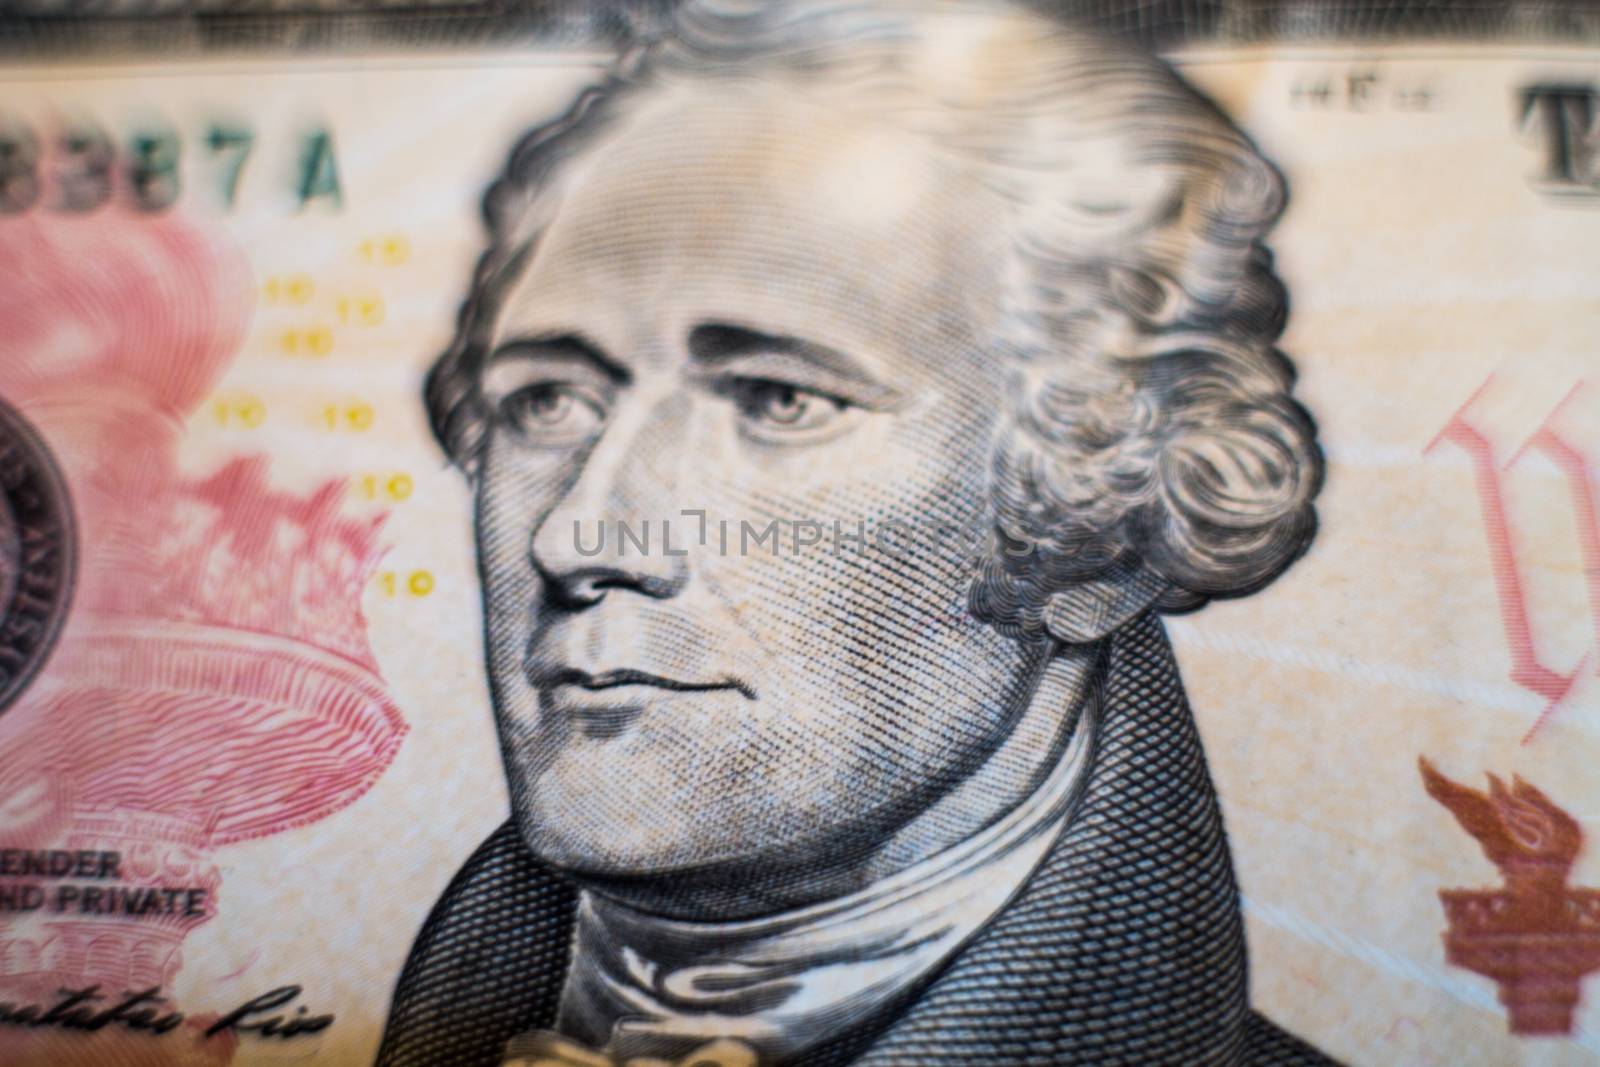 Portrait of a 10 dollar bill - Hamilton . US statesmen, a prominent figure in the First American Bourgeois Revolution.